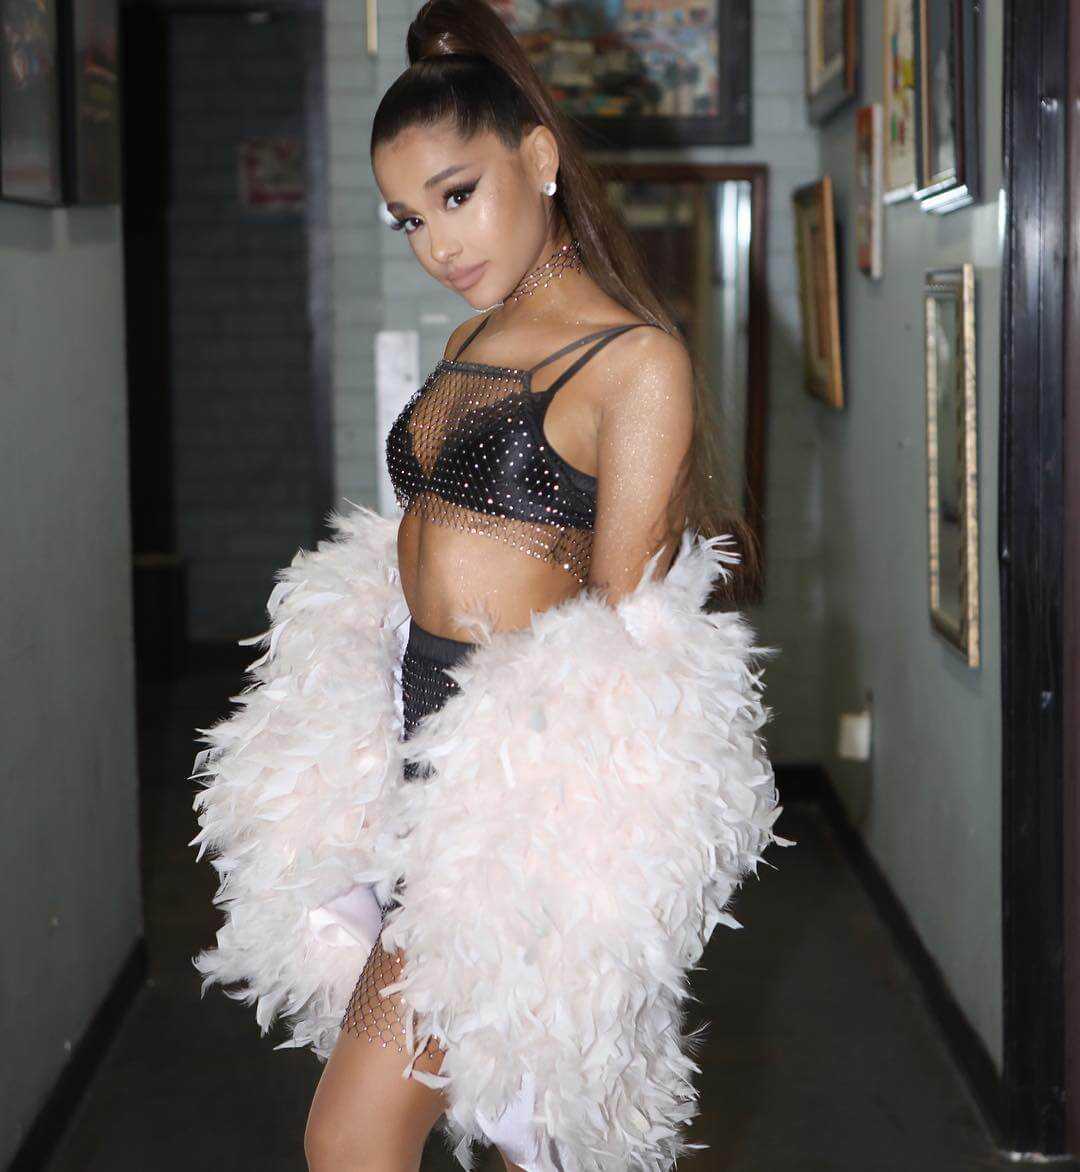 51 Nude Pictures Of Ariana Grande That Will Make You Begin To Look All Starry Eyed At Her | Best Of Comic Books